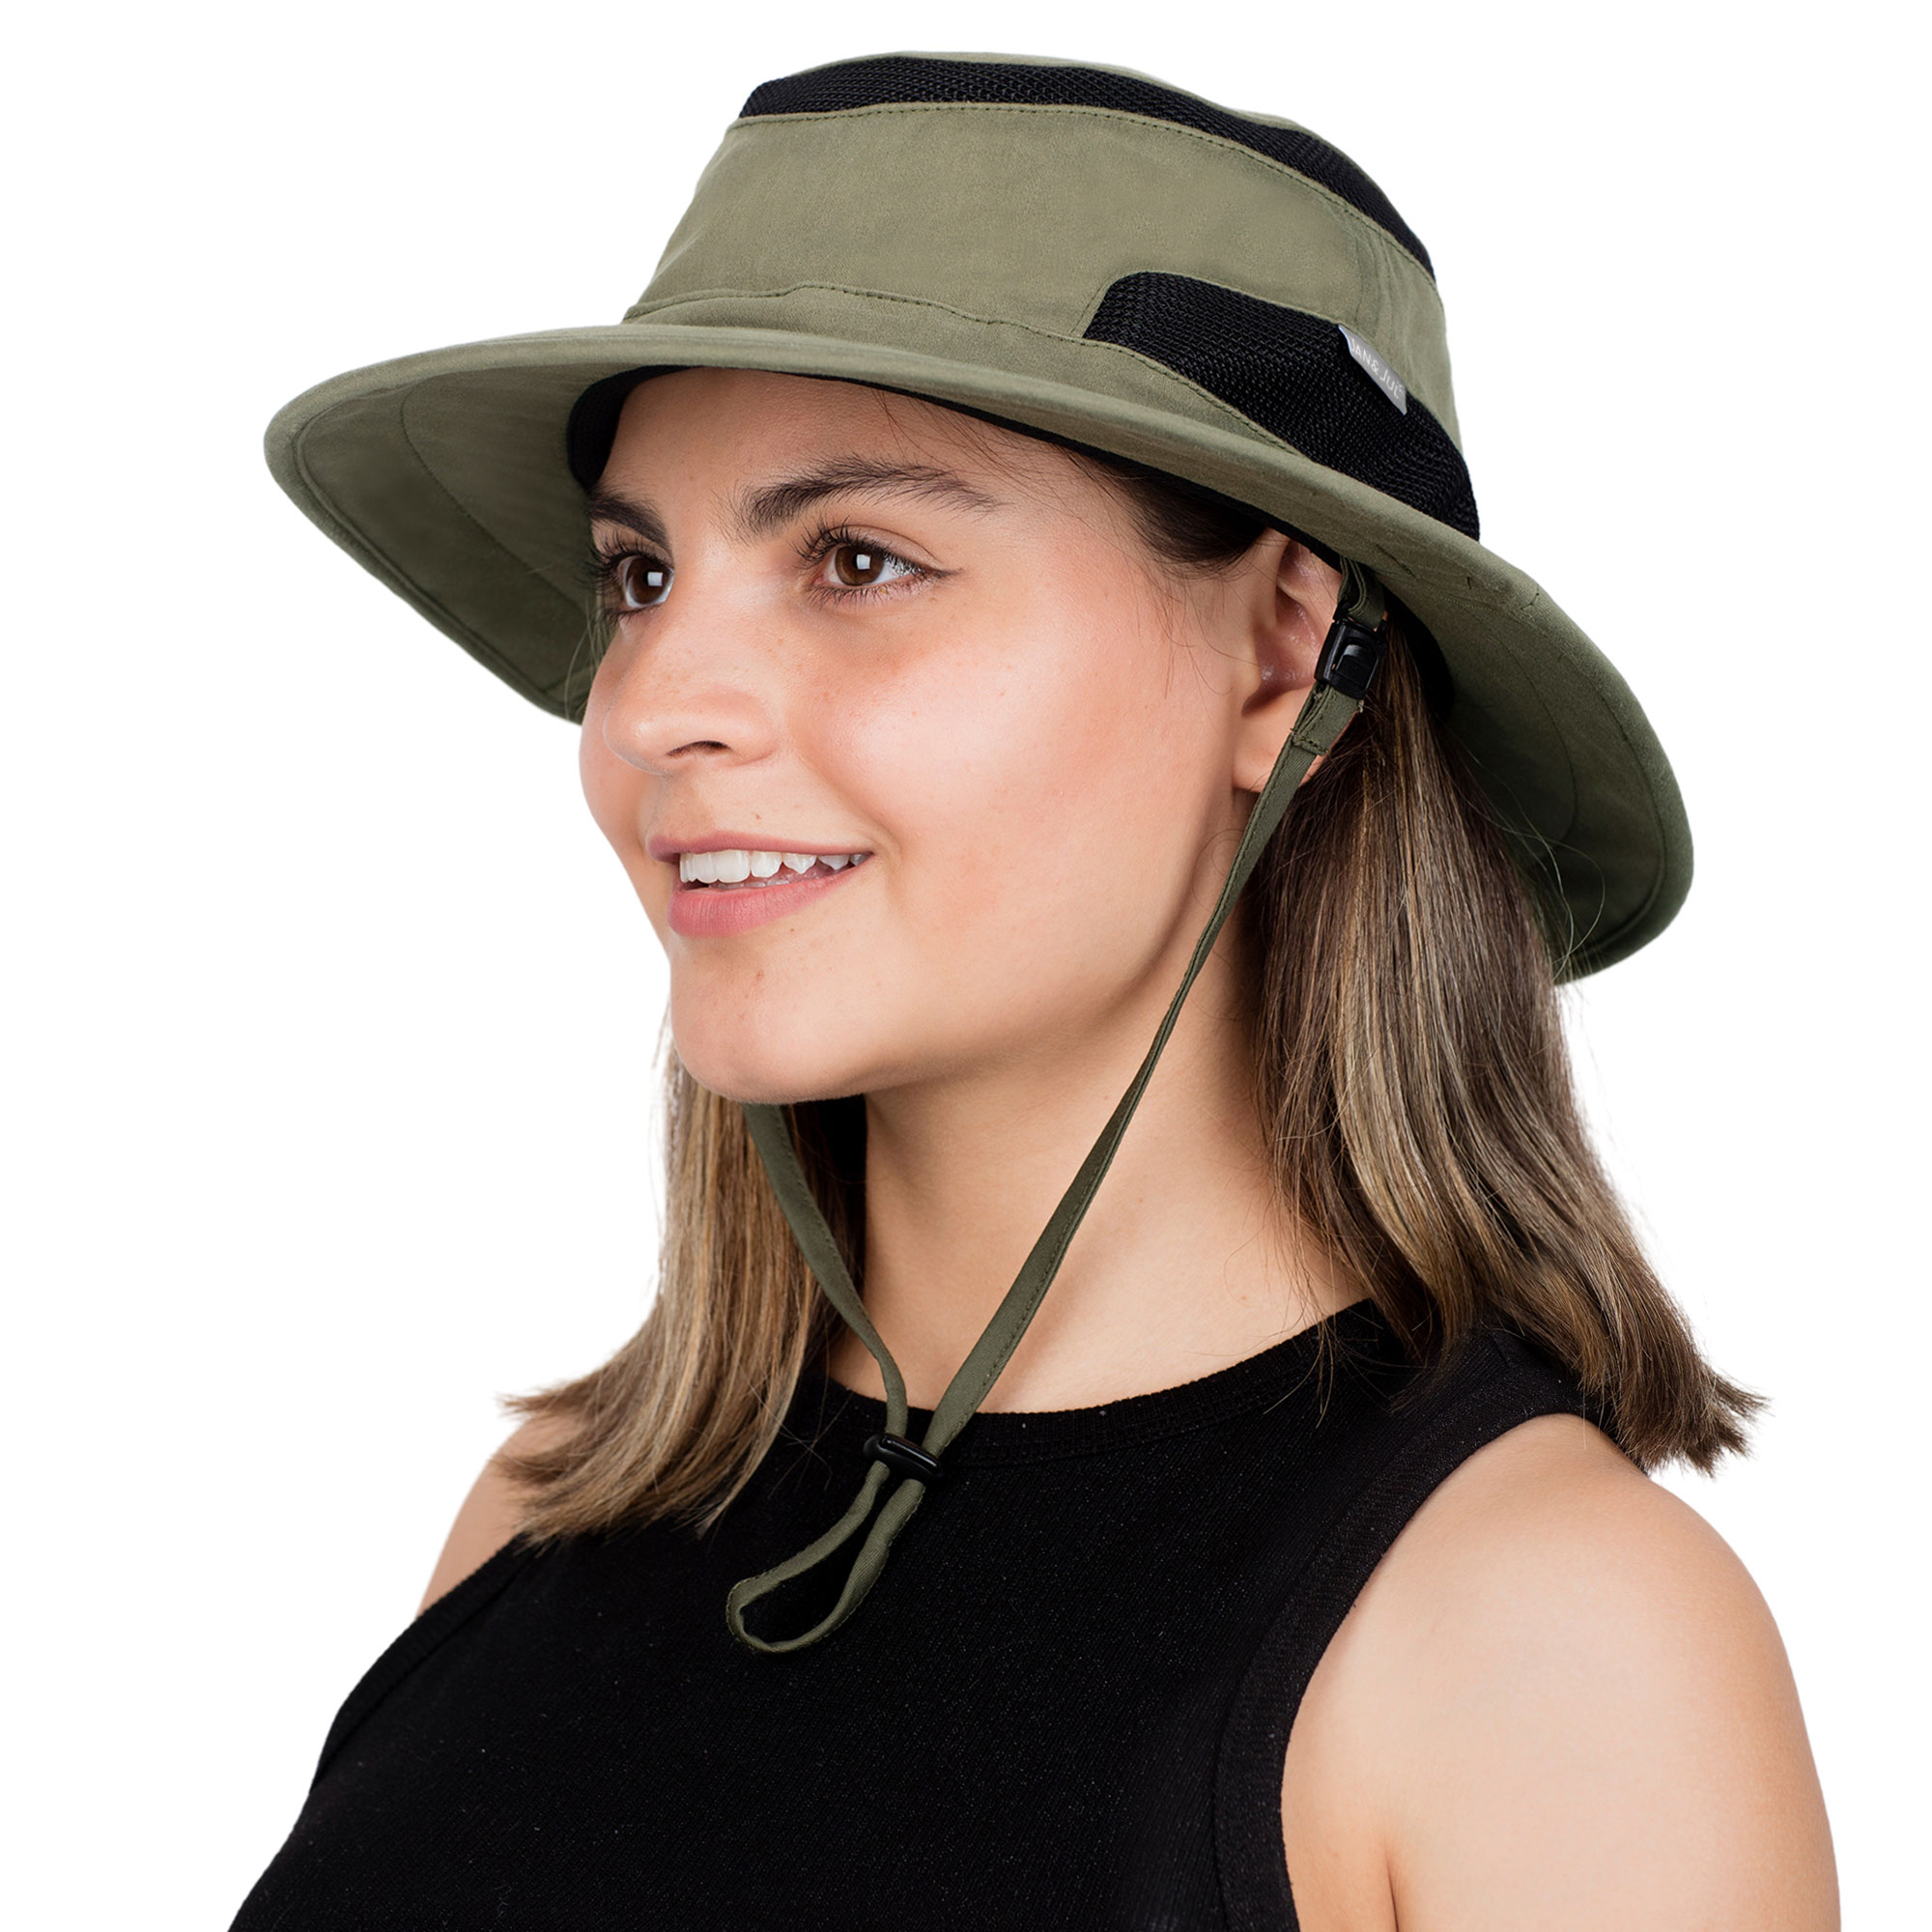 Adult Packable Hiking Hats, Army Green for Men & Women